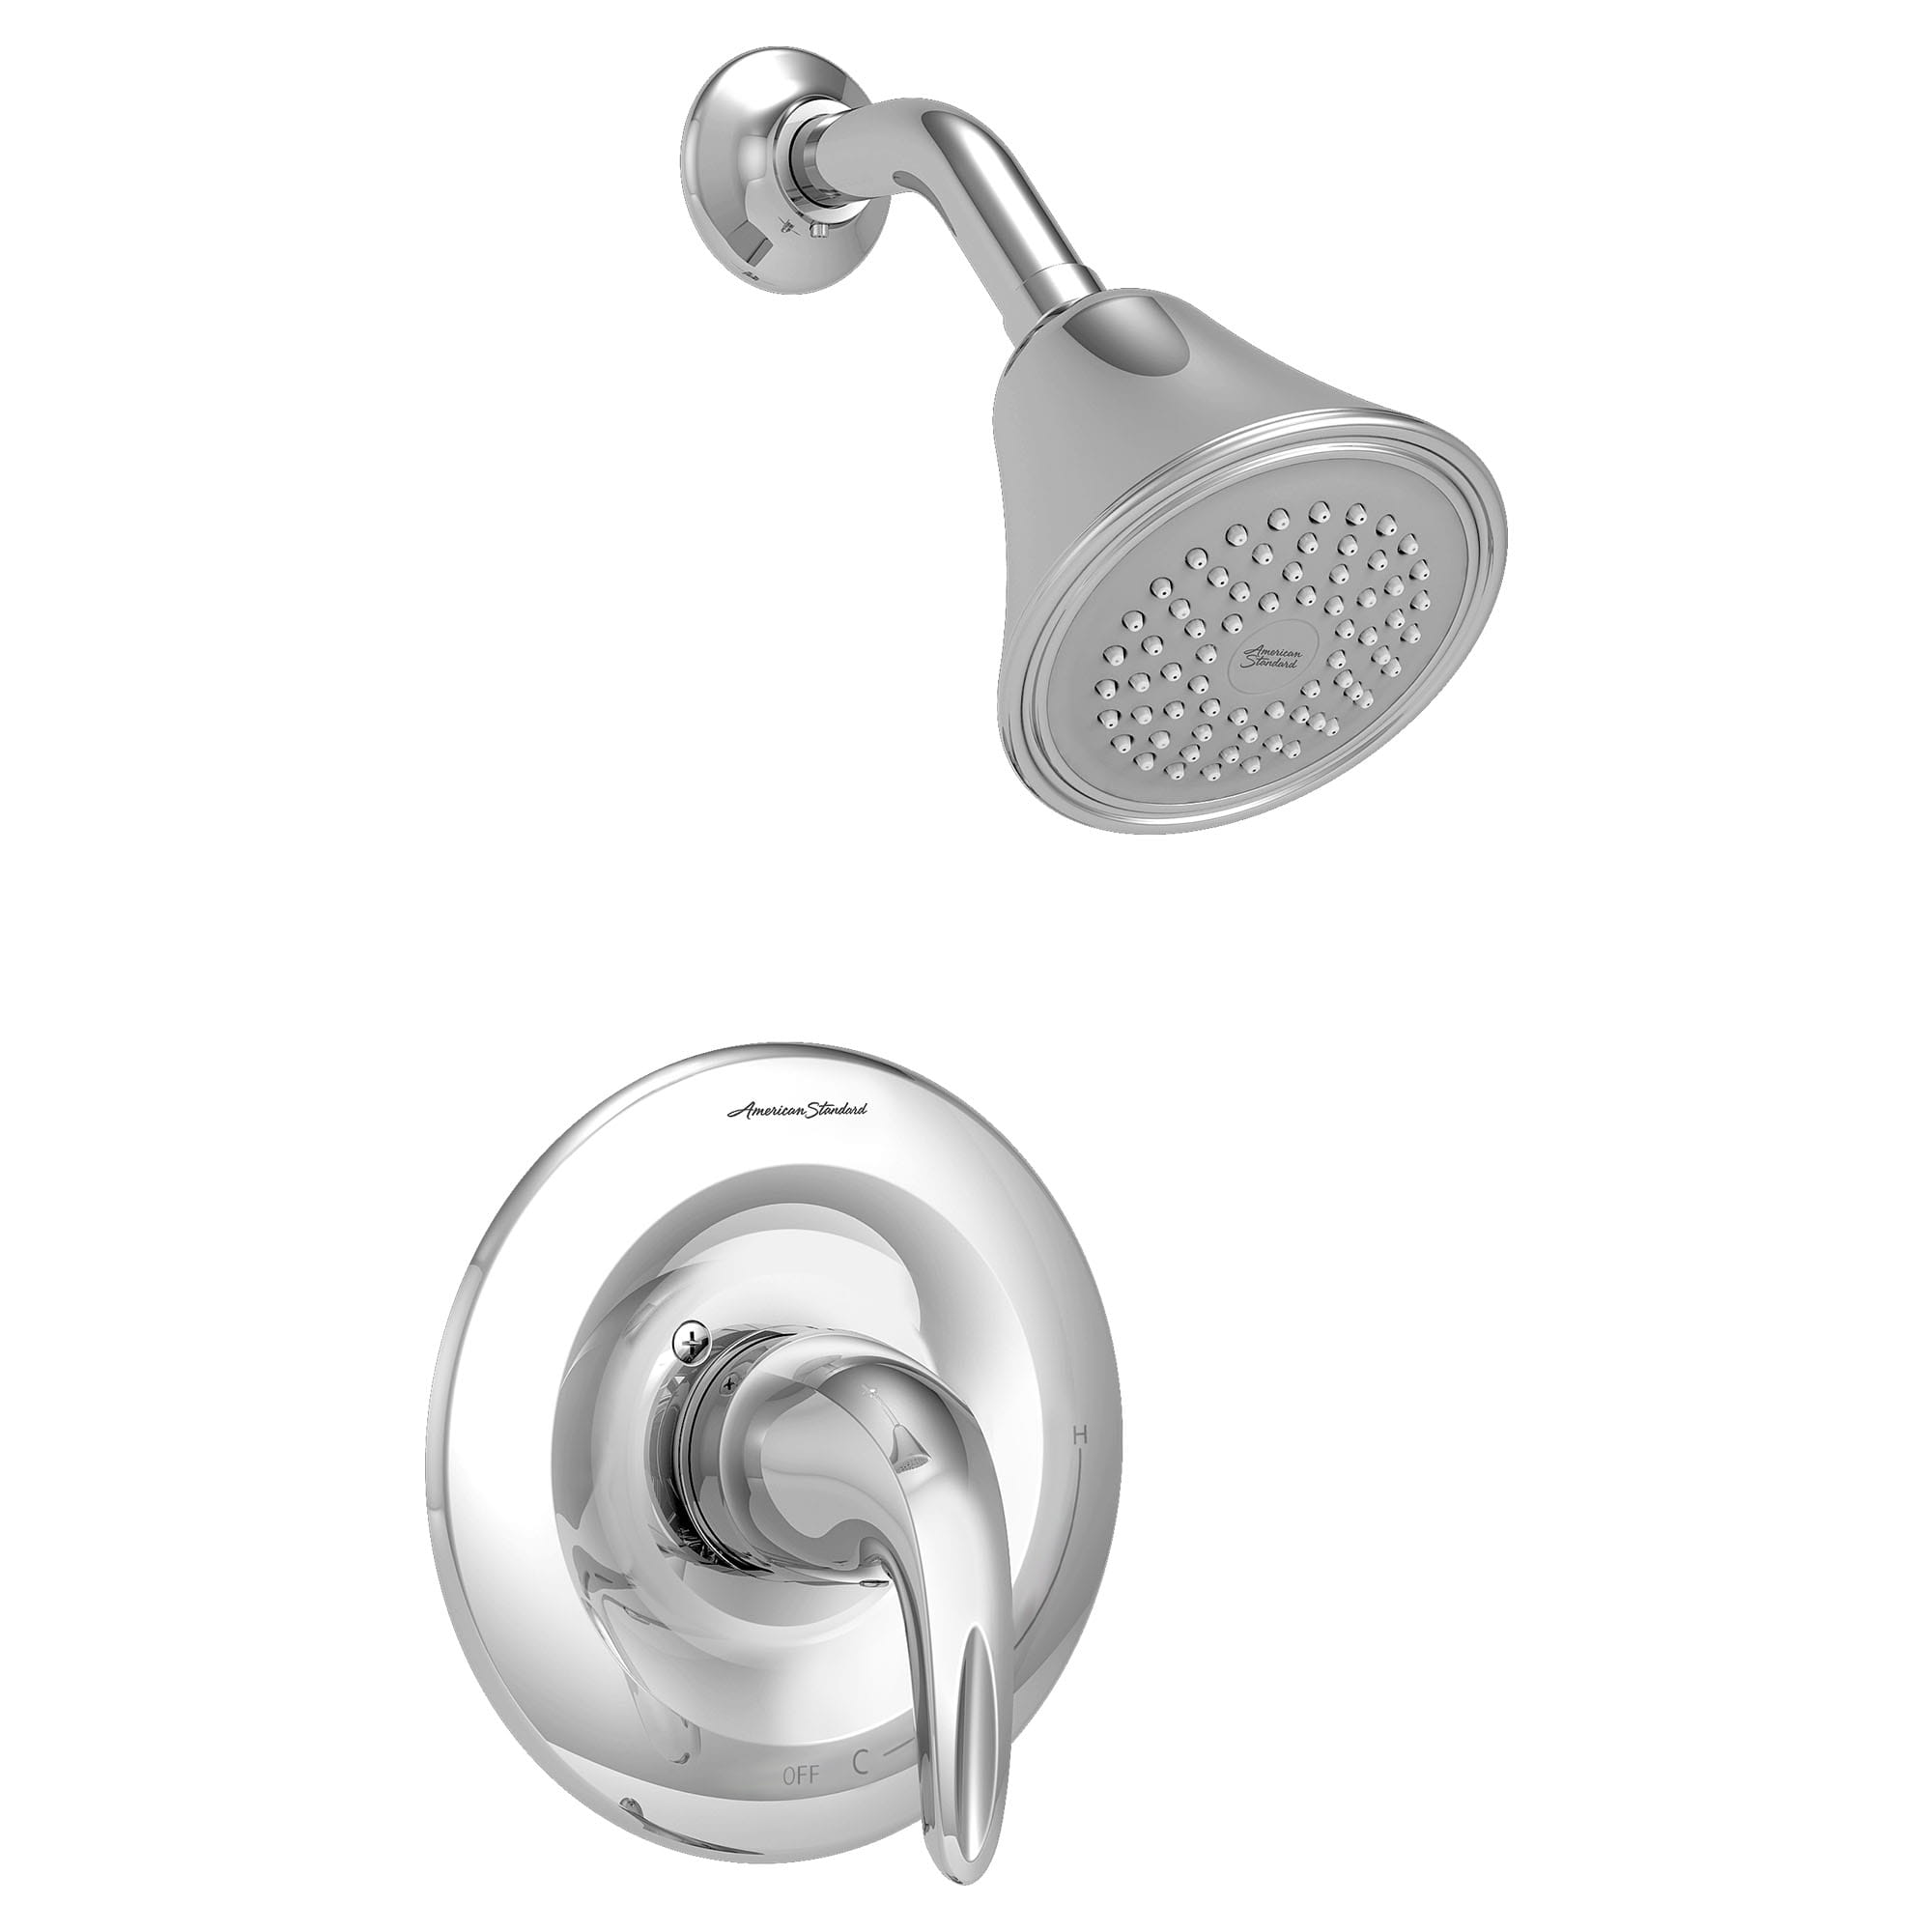 Reliant 3 25 gpm 95 L min Shower Trim Kit With Showerhead Double Ceramic Pressure Balance Cartridge With Lever Handle CHROME